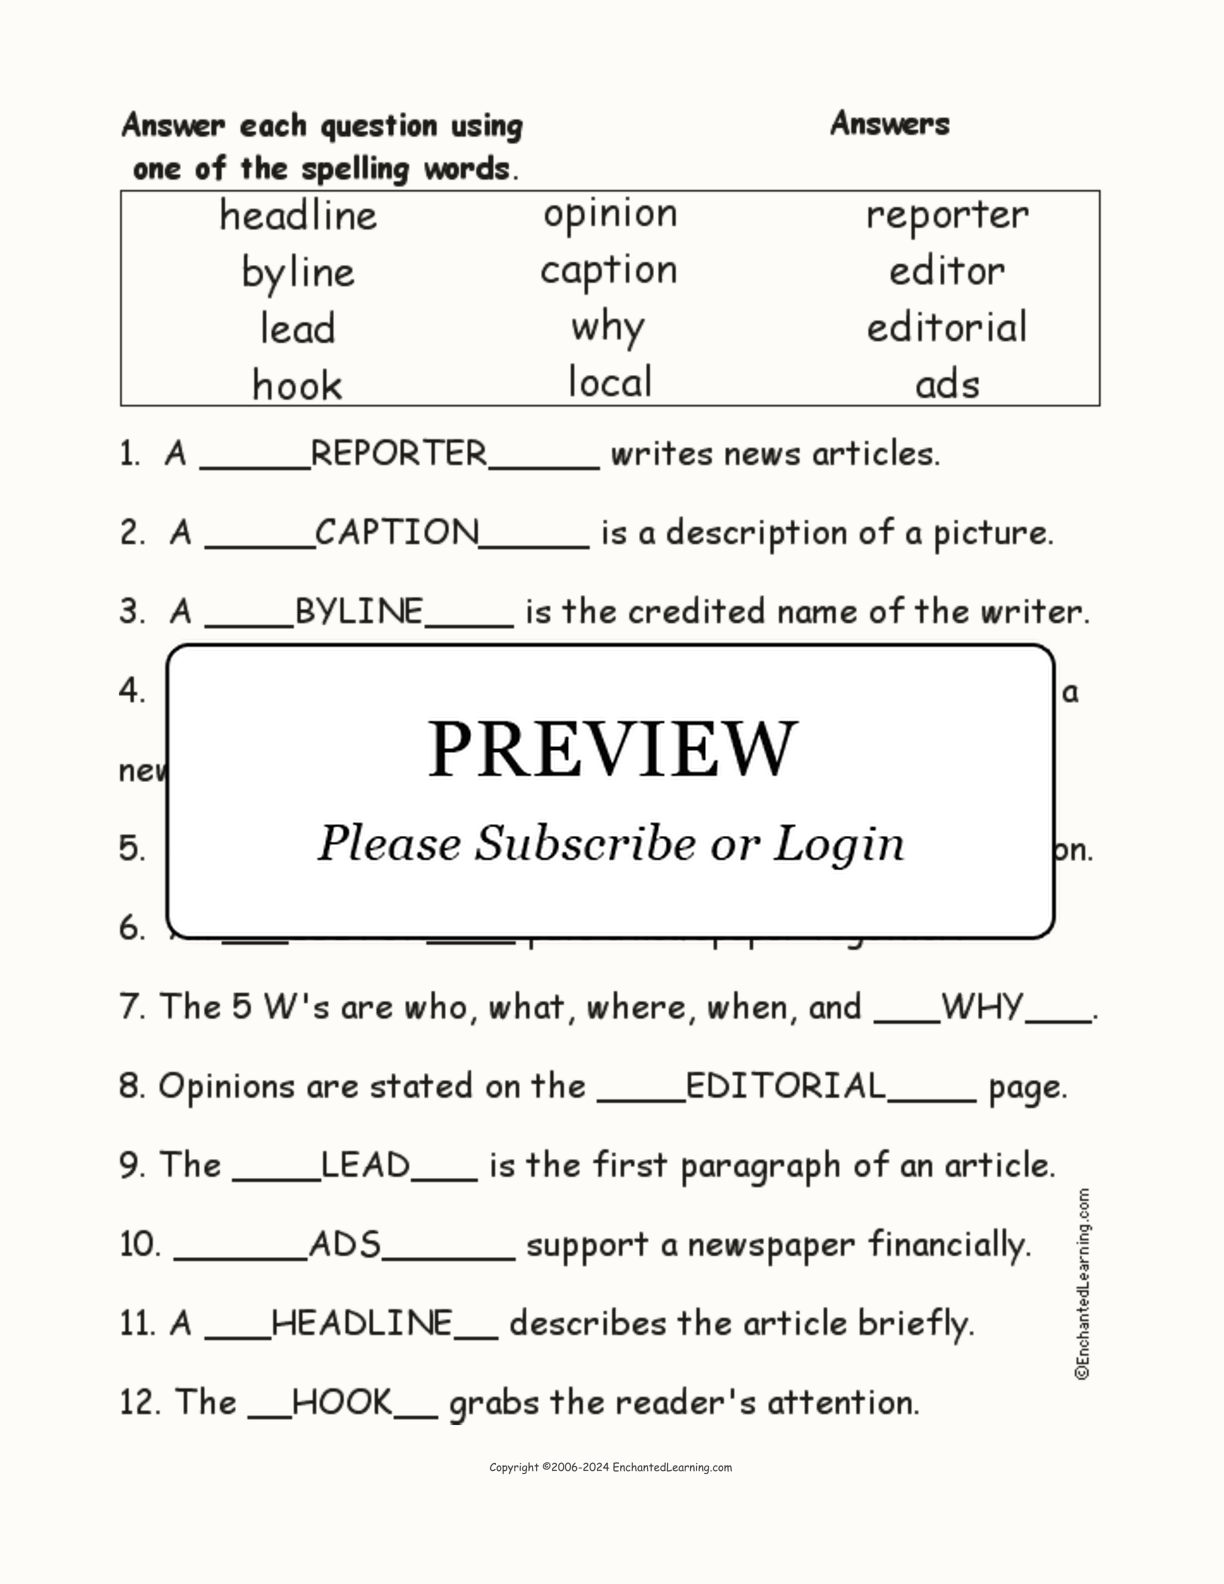 Newspaper Spelling Word Questions interactive worksheet page 2